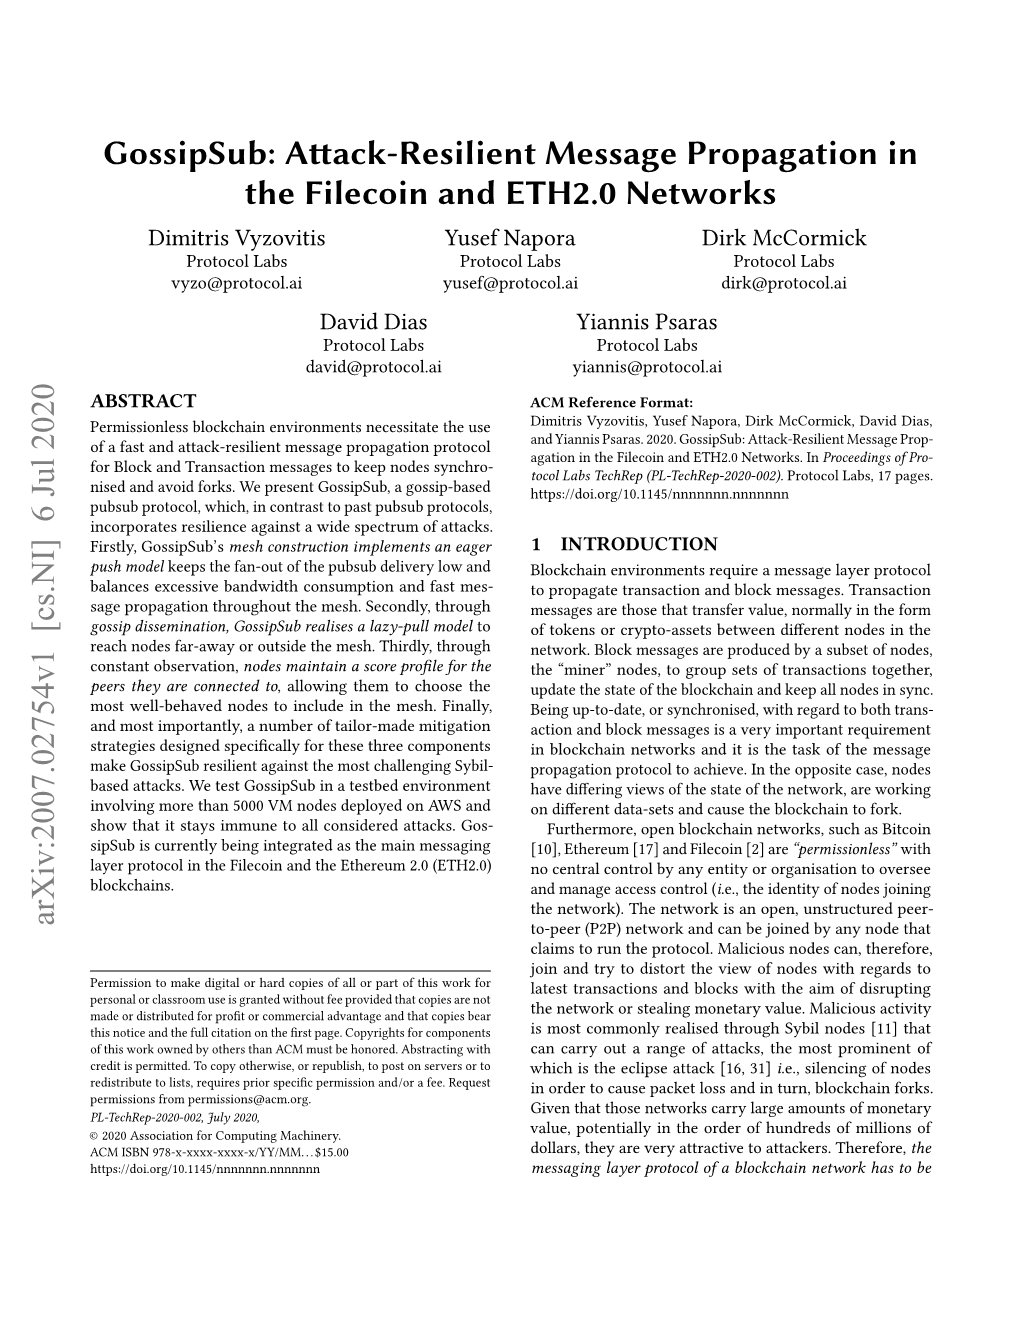 Gossipsub: Attack-Resilient Message Propagation in the Filecoin and ETH2.0 Networks